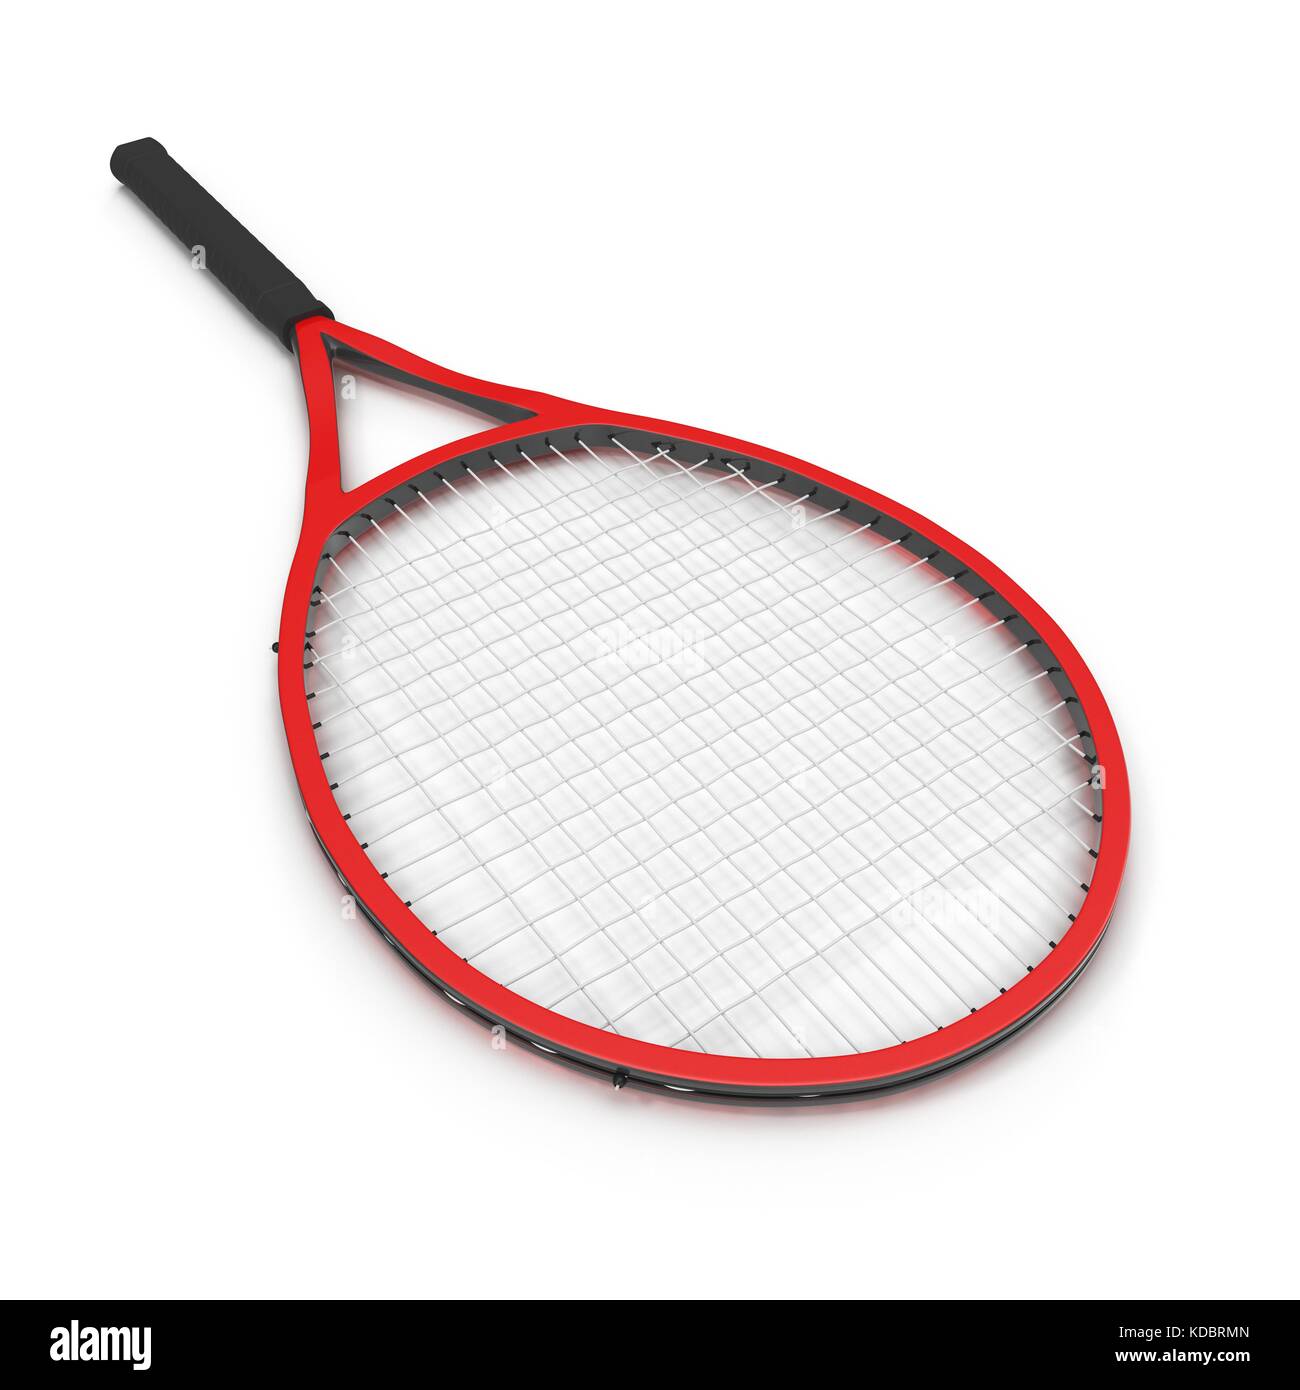 Red tennis racket isolated white background Stock Photo